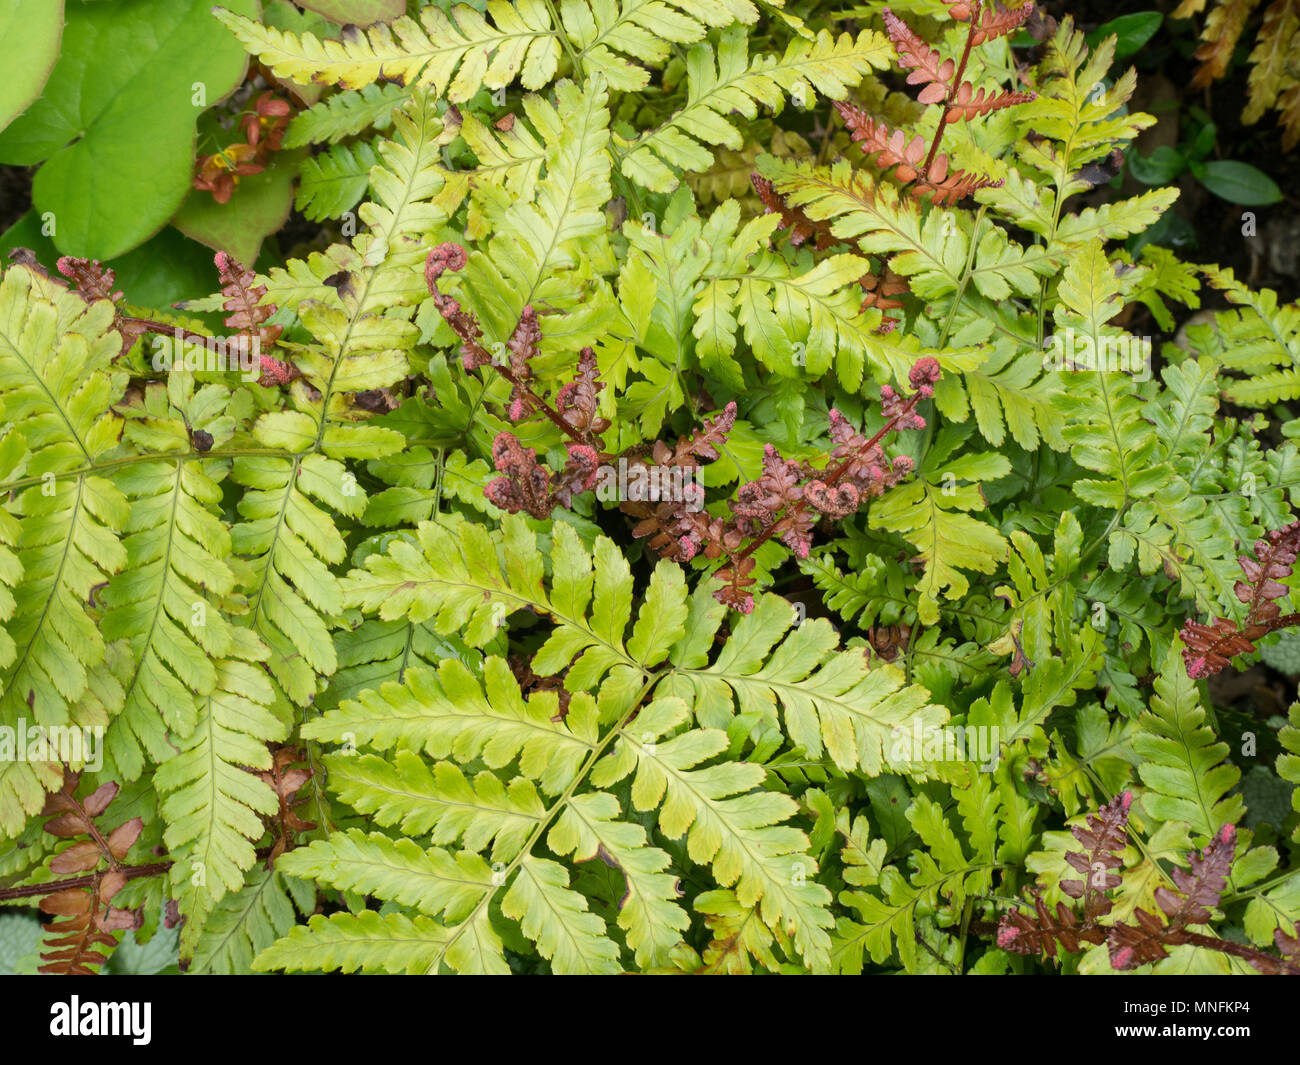 The bright red new fronds on the fern Dtyopteris erythrosora 'Brilliance' standing out against the light green older foliage Stock Photo